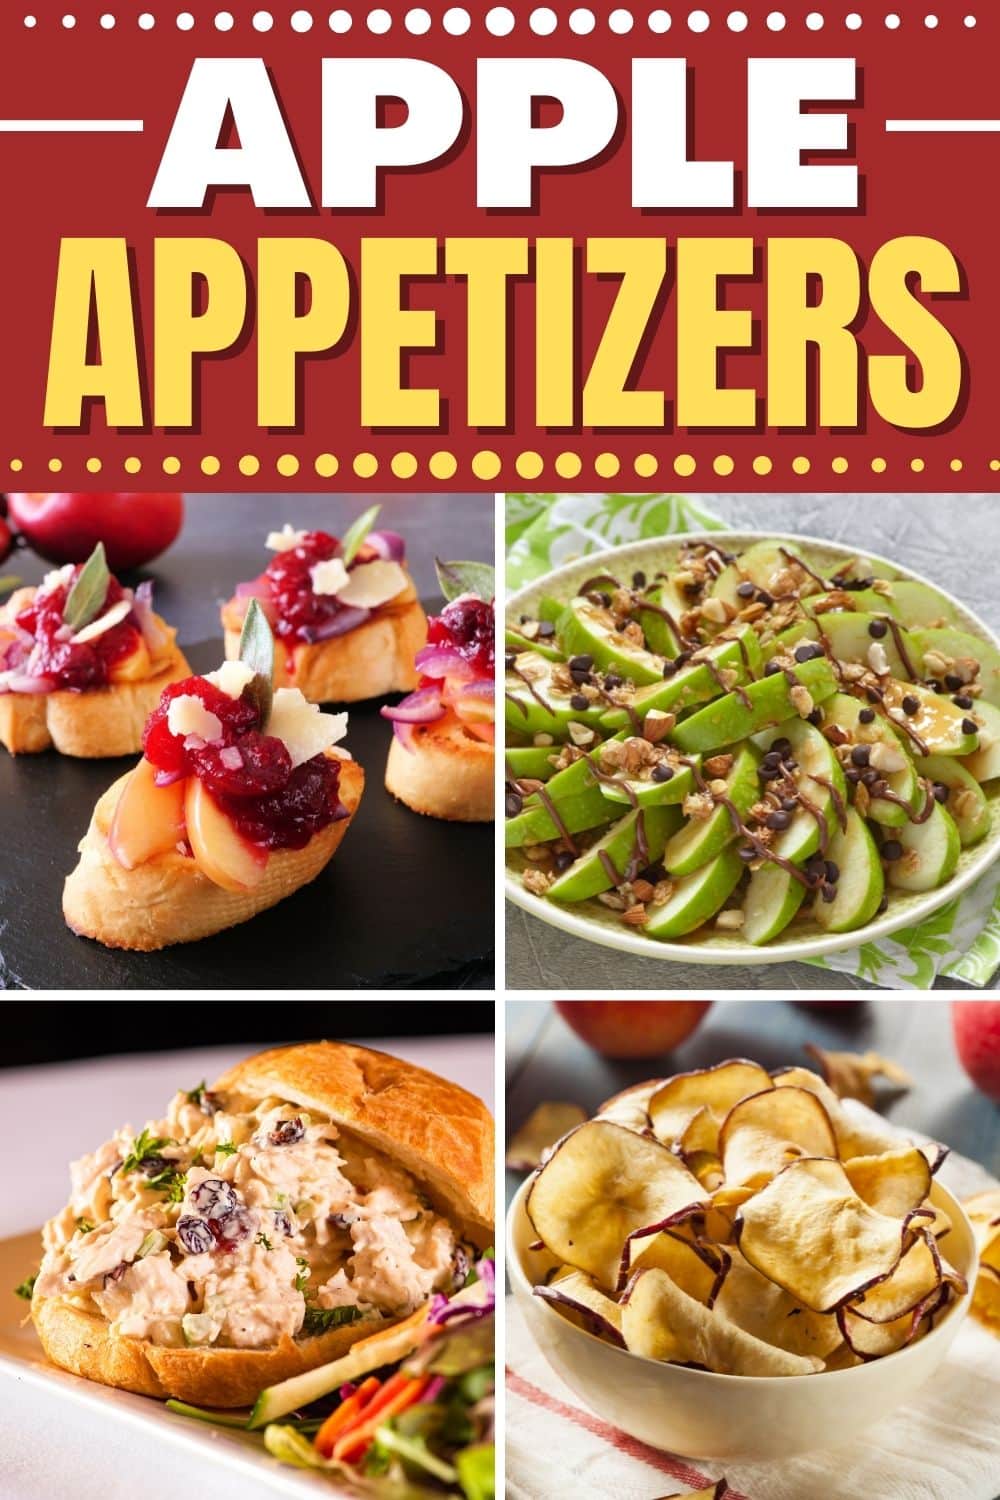 20 Easy Apple Appetizers - Insanely Good